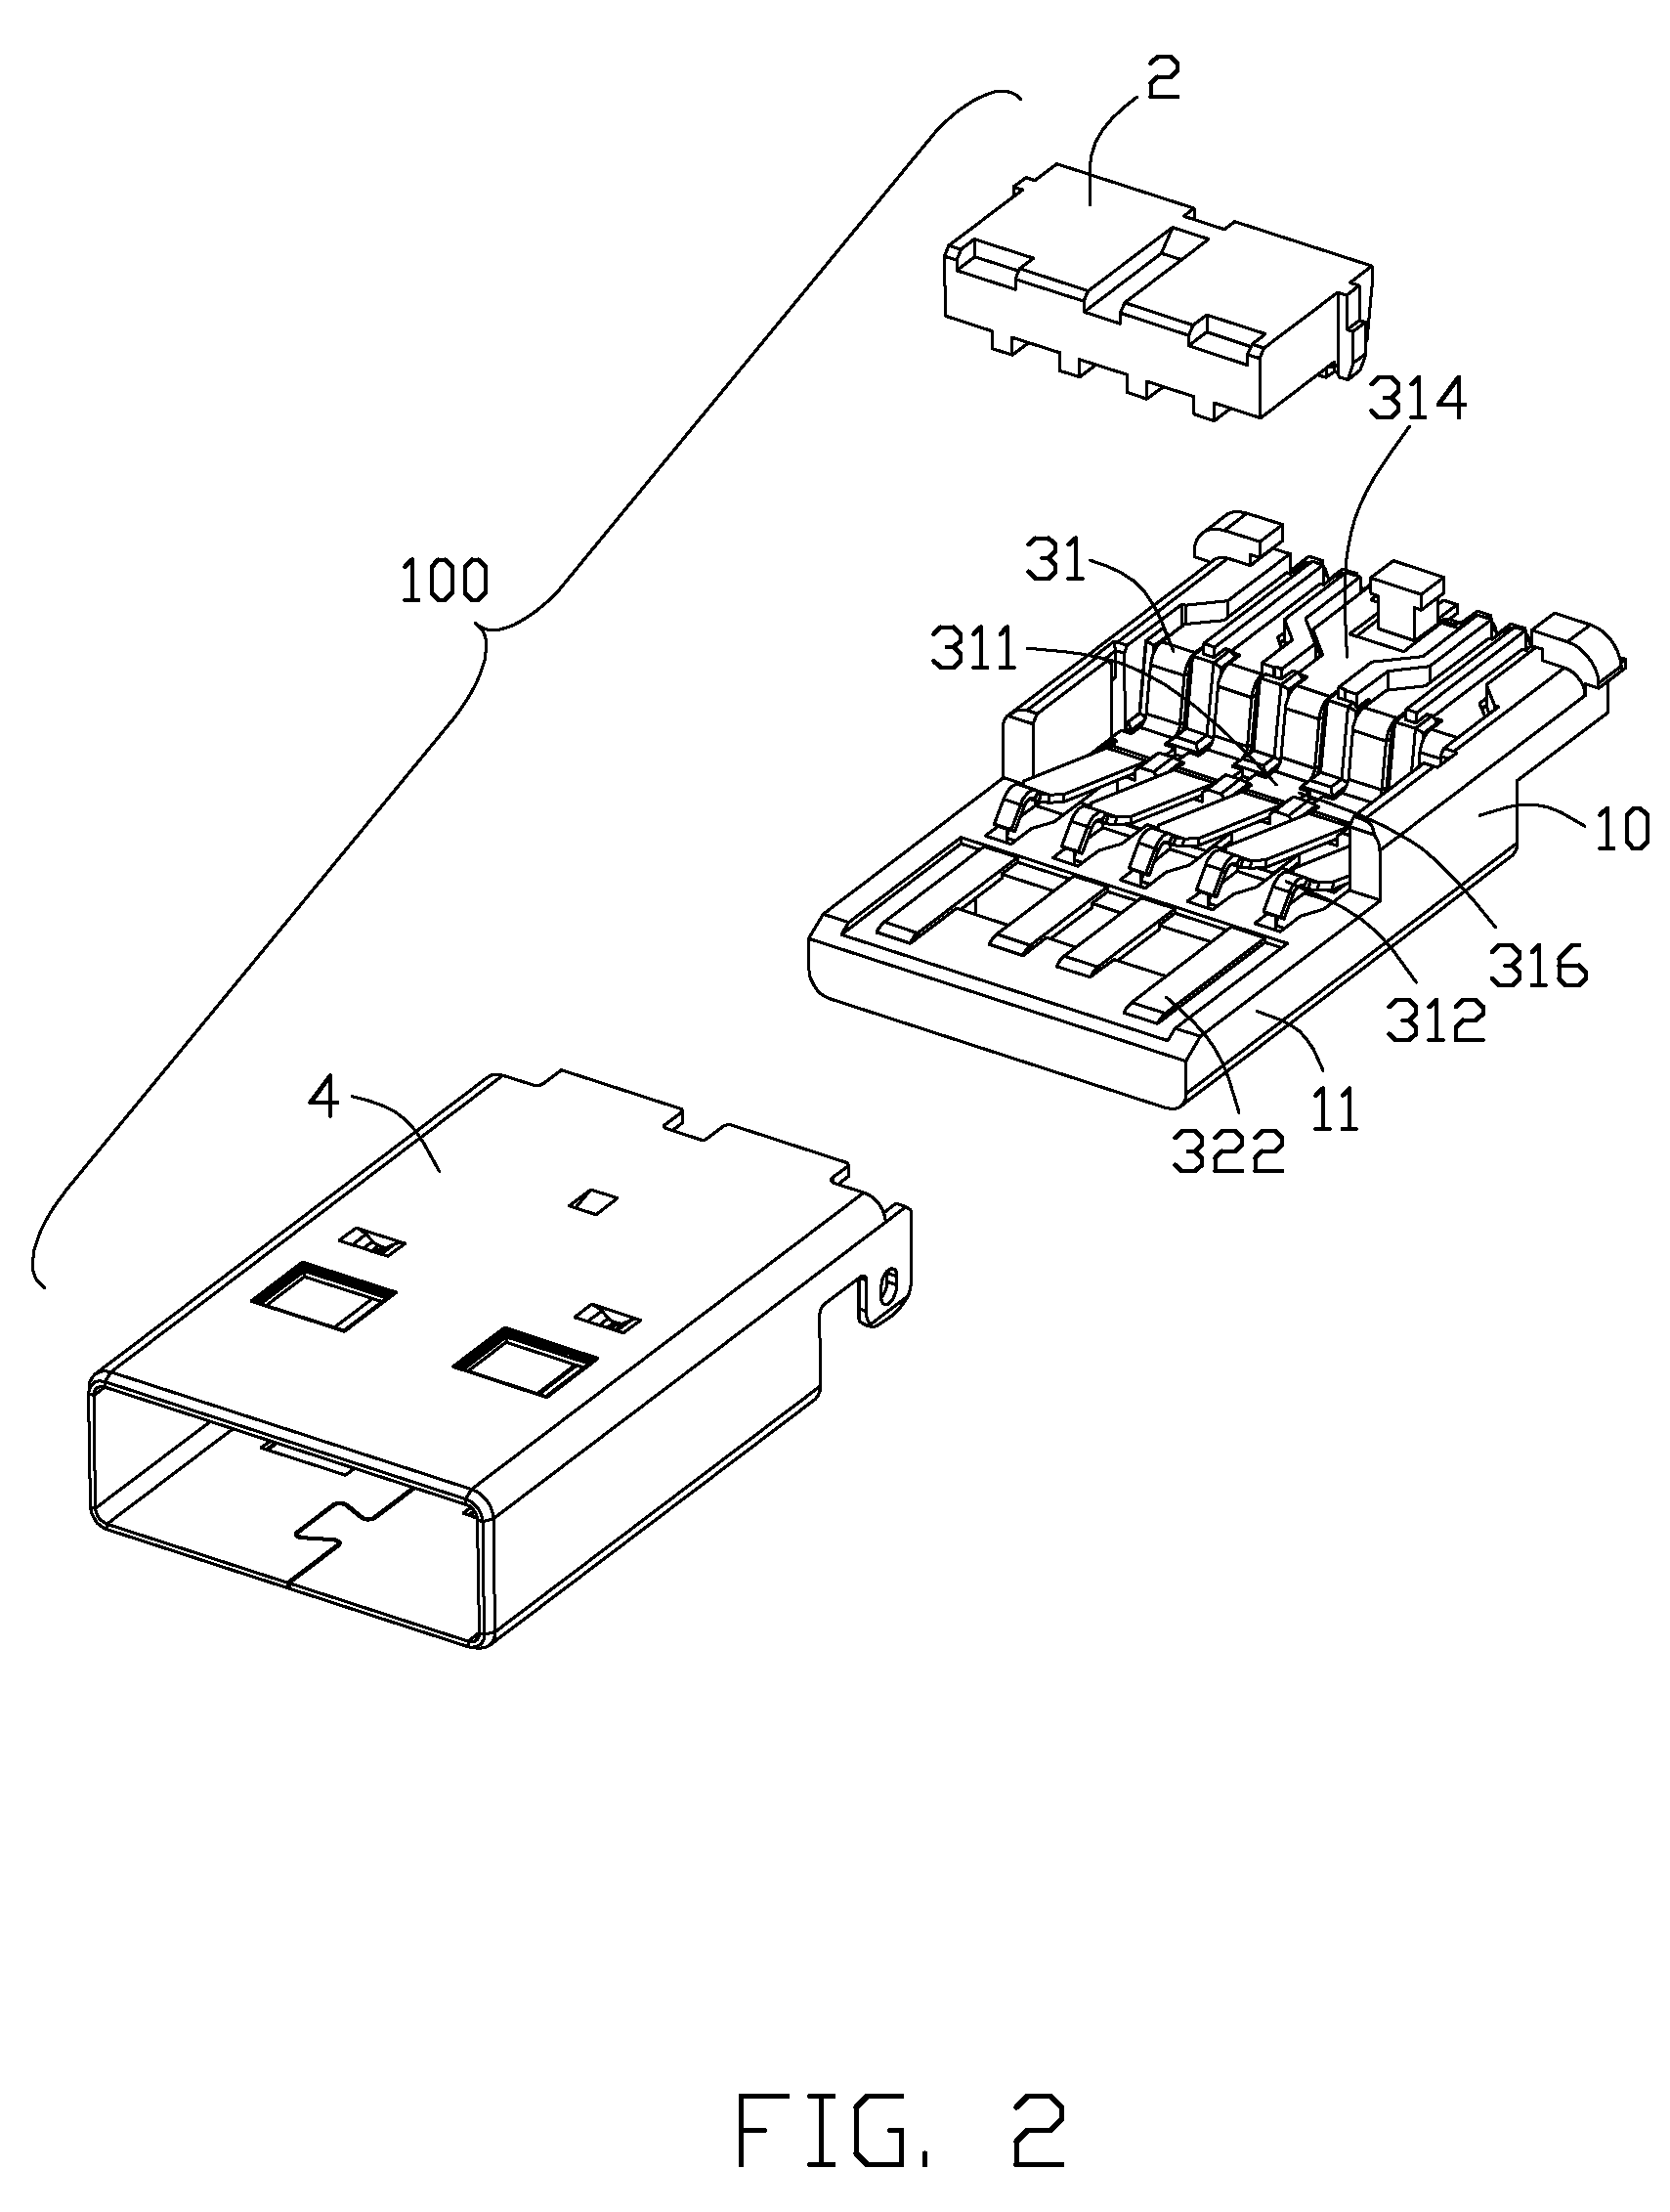 Connector having improved housing to position contacts thereof reliably